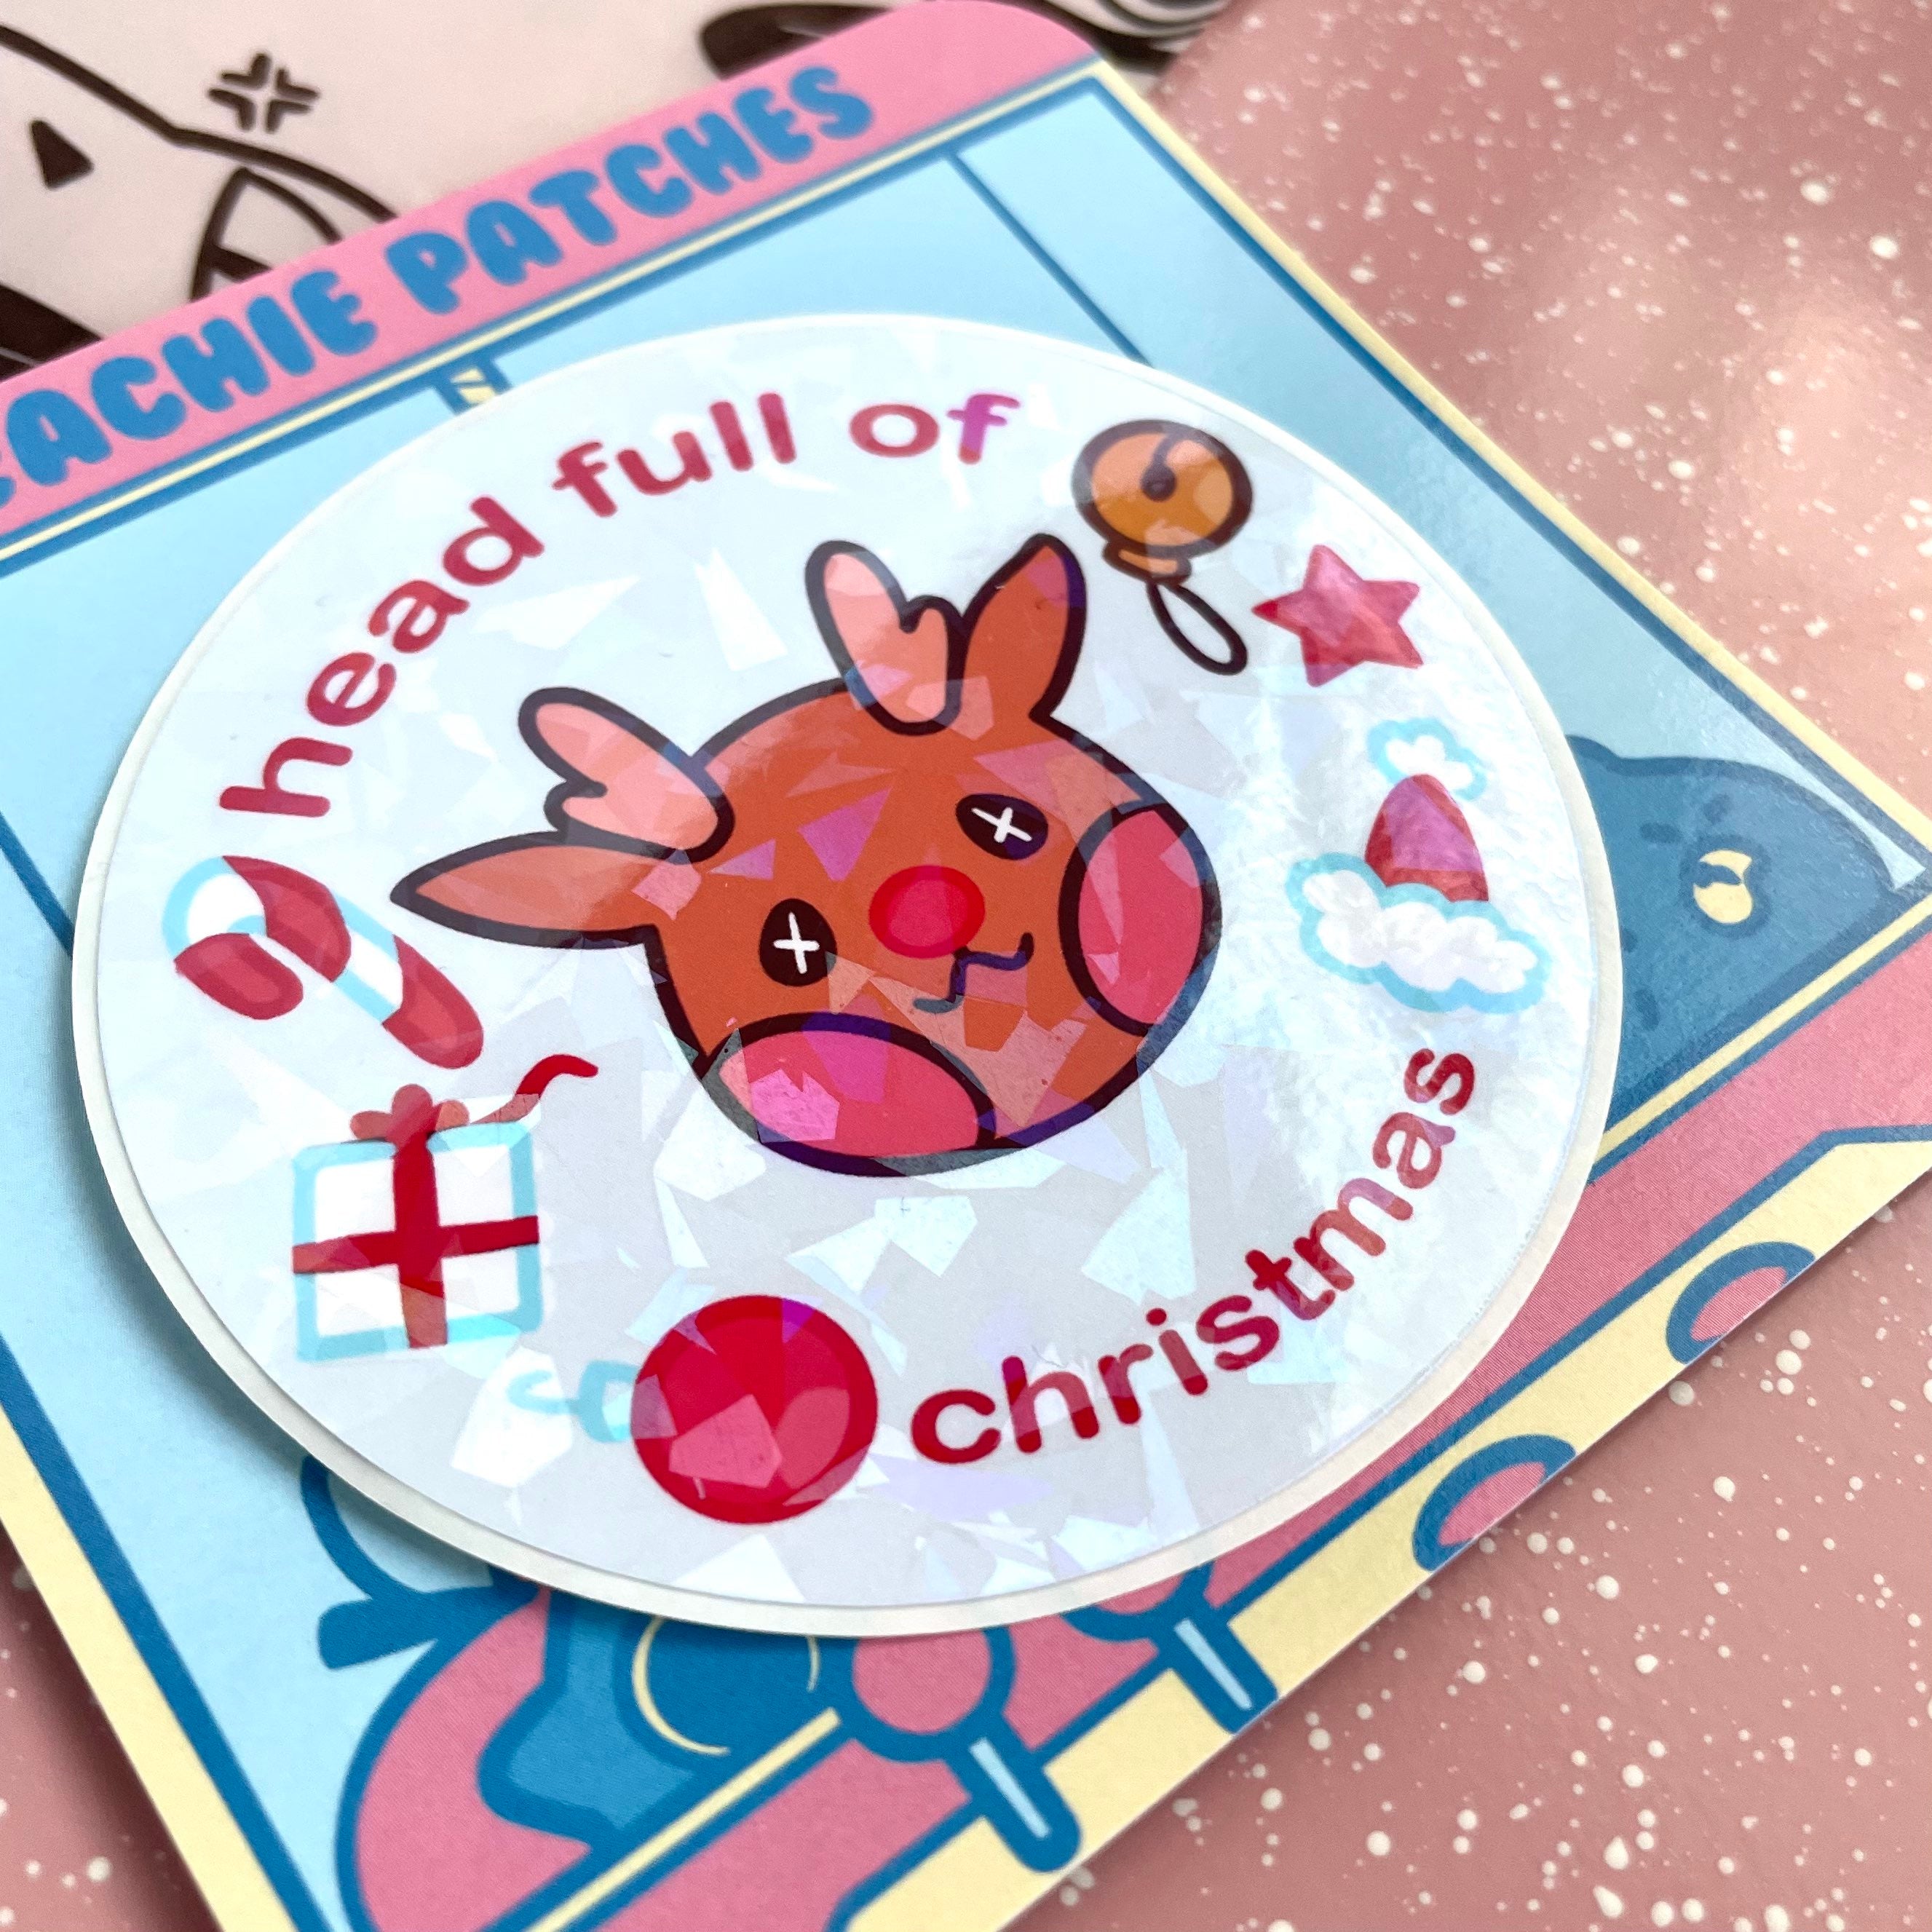 ‘HEAD FULL OF CHRISTMAS’ REINDEER HOLOGRAPHIC CRACKED ICE LAPTOP STICKER